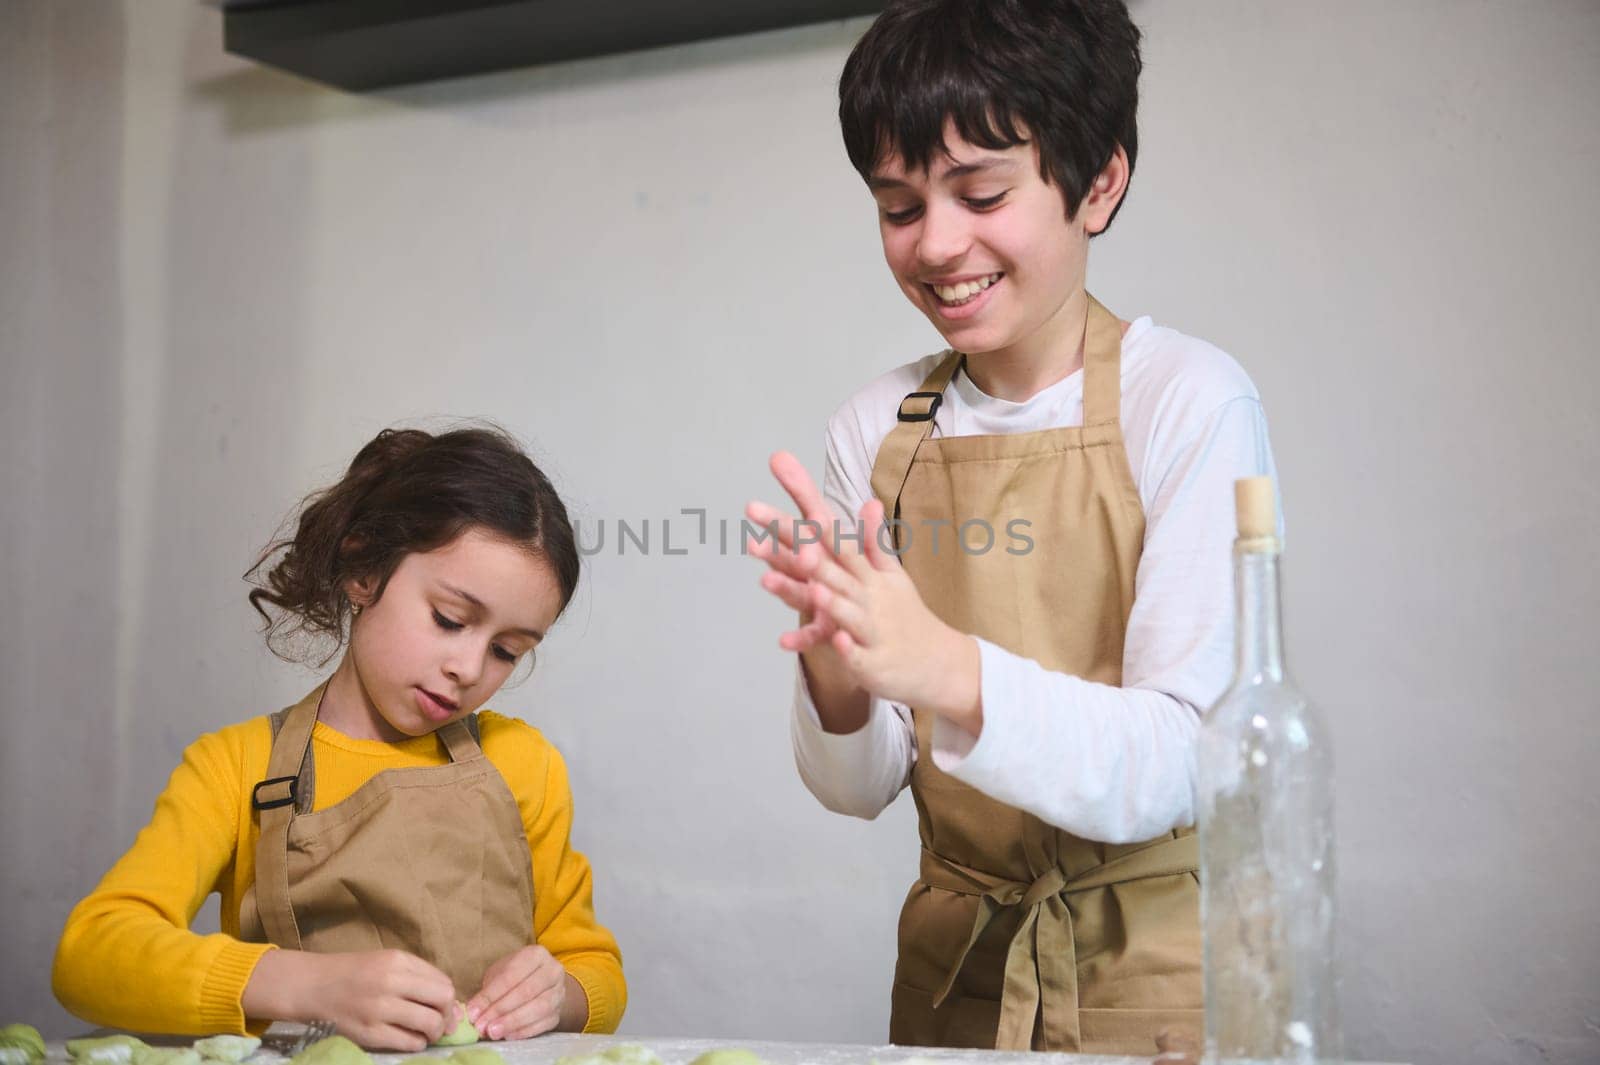 Cute kids in beige chef apron, making dumplings during a cooking class indoors, standing against a white wall background by artgf